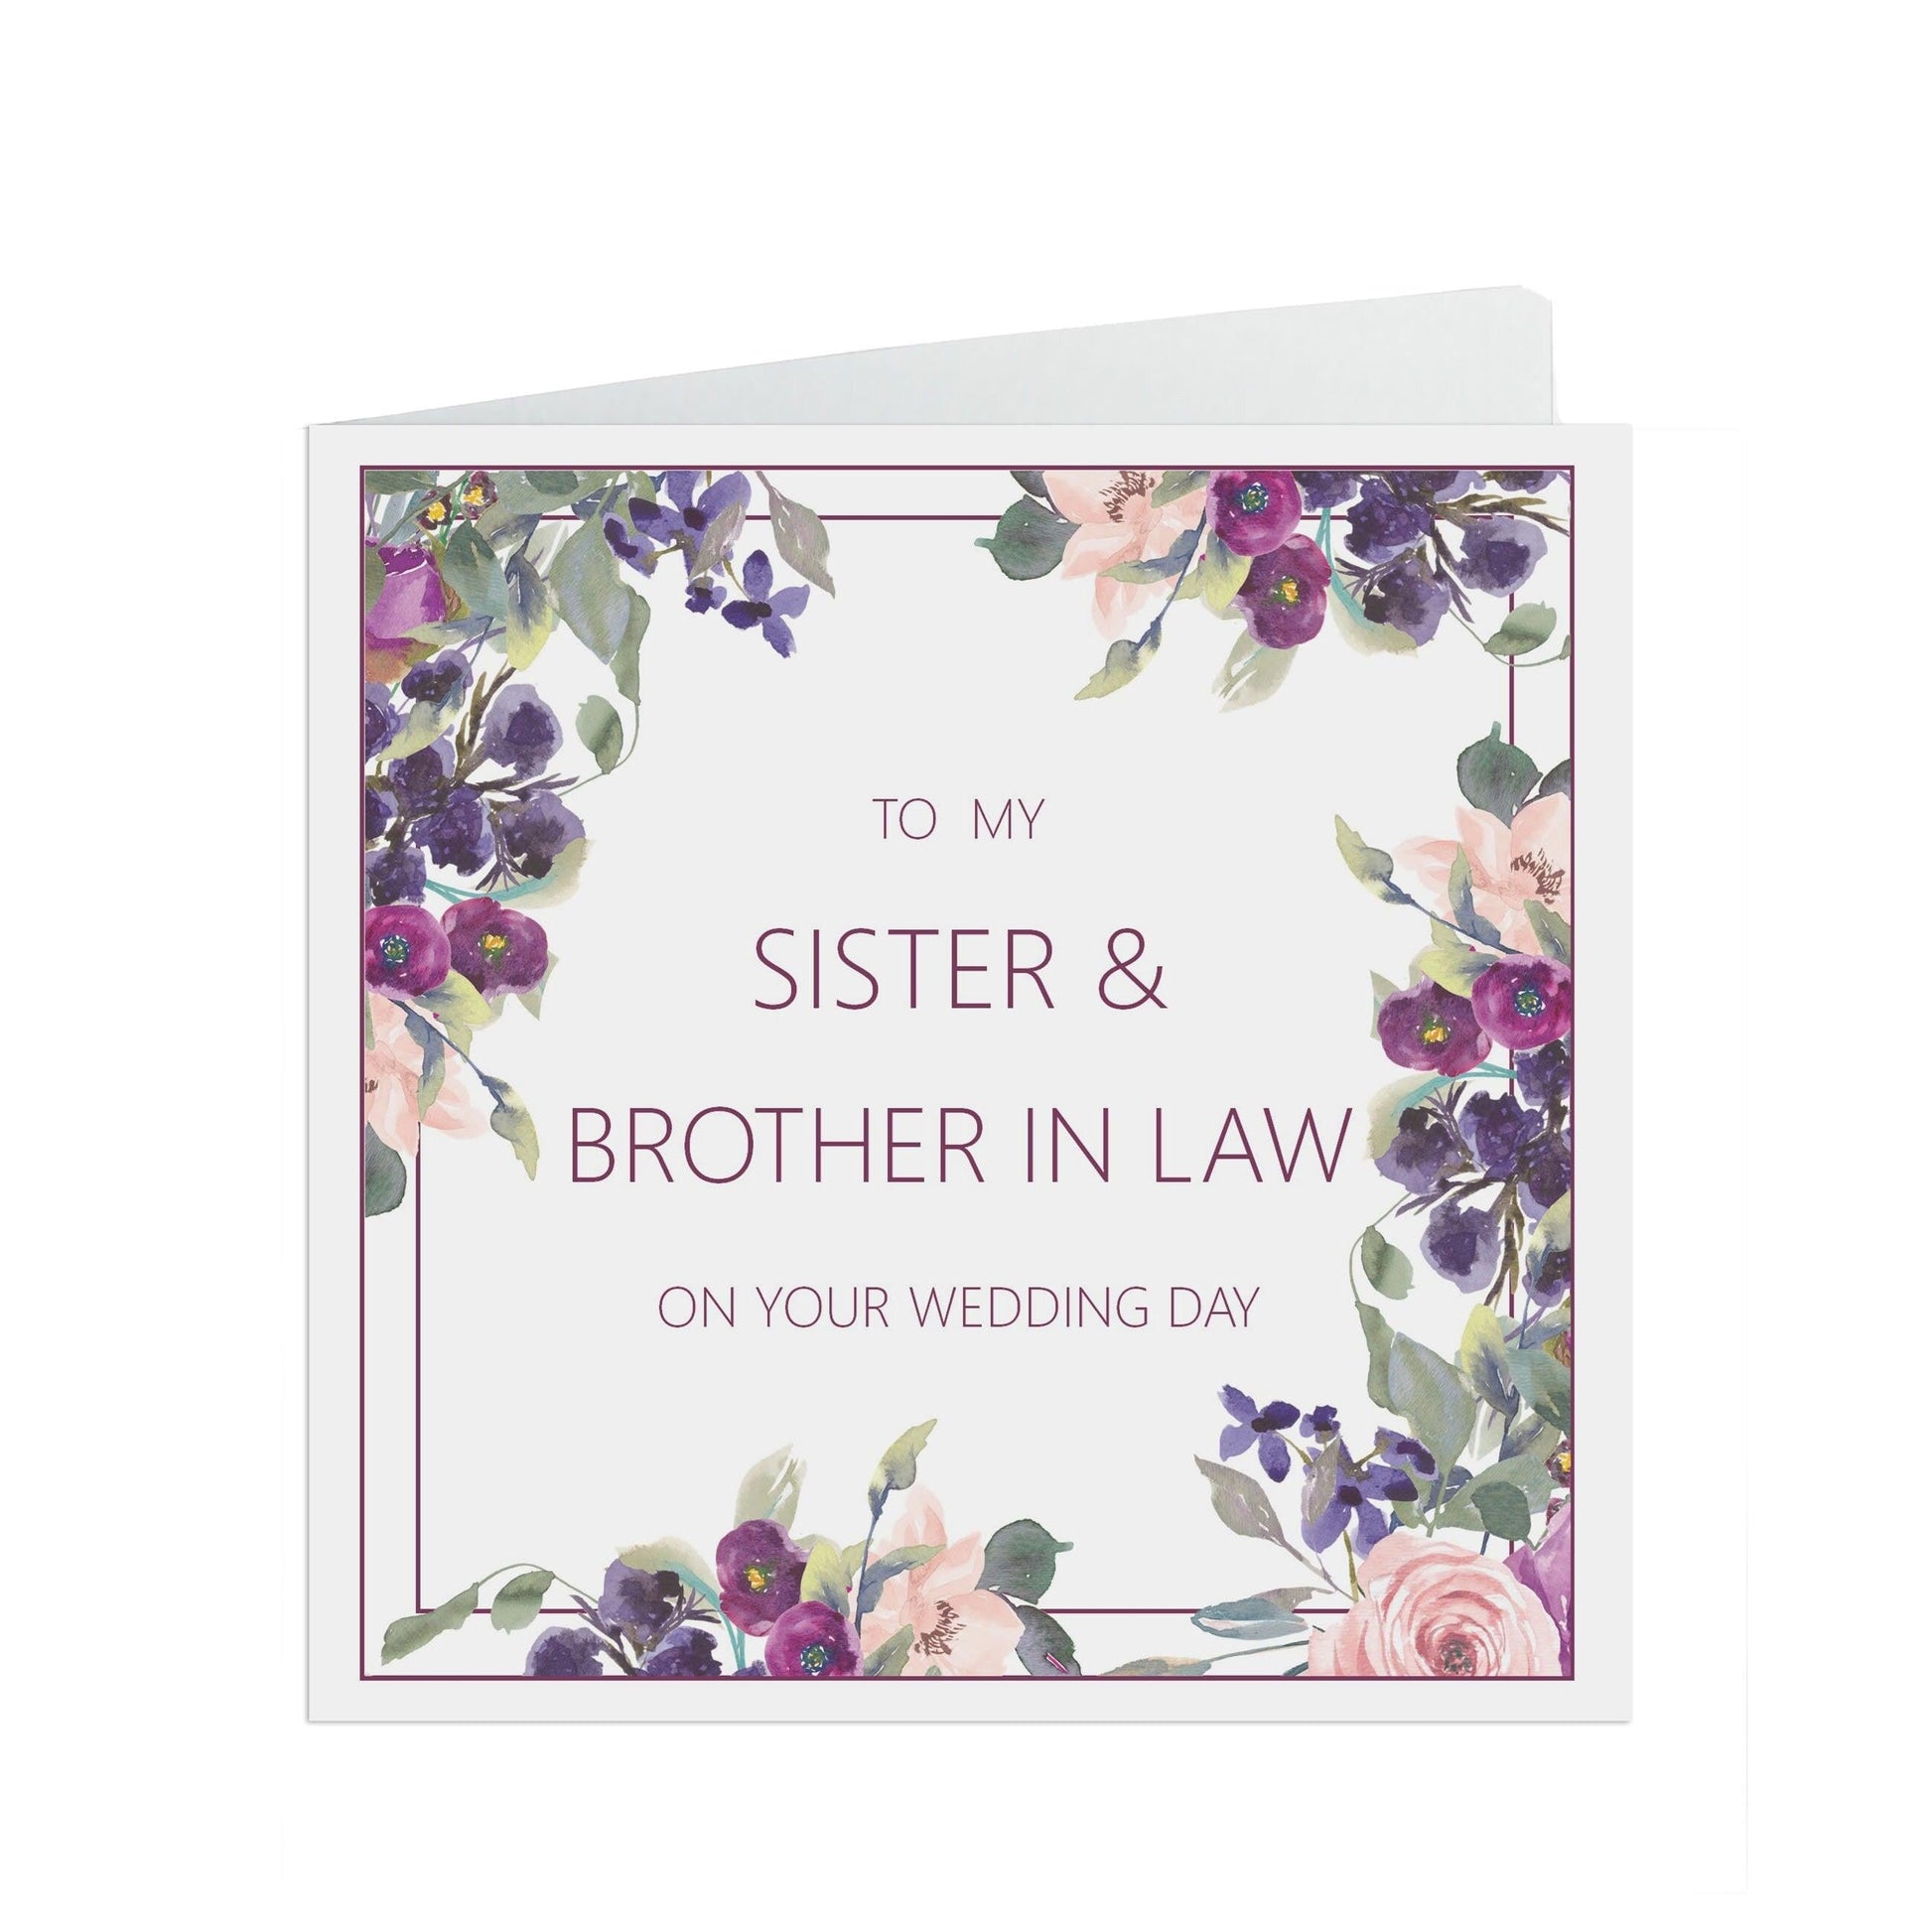  Sister & Brother In Law Wedding Day Card, Purple Floral 6x6 Inches In Size With A Kraft Envelope by PMPRINTED 